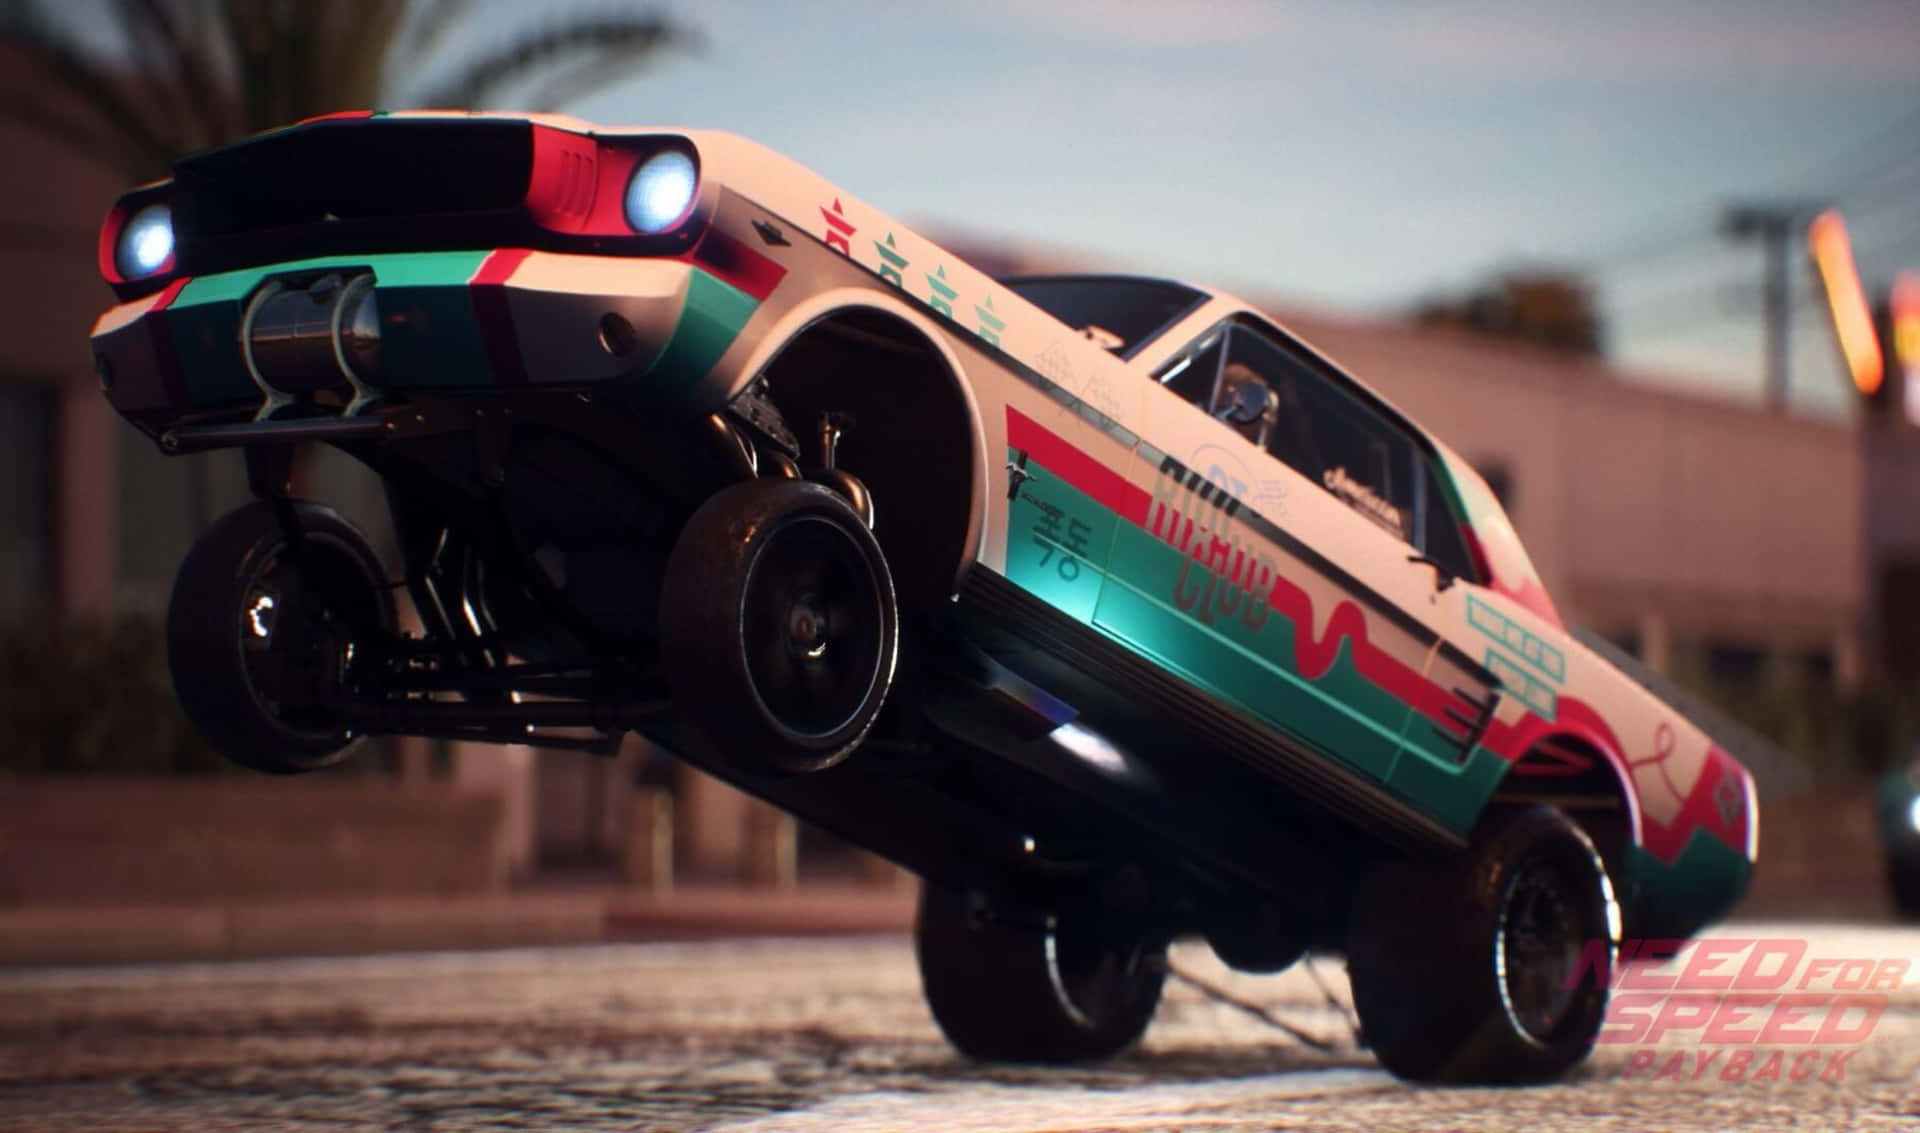 Lasciache L'adrenalina Scorra In Need For Speed Payback